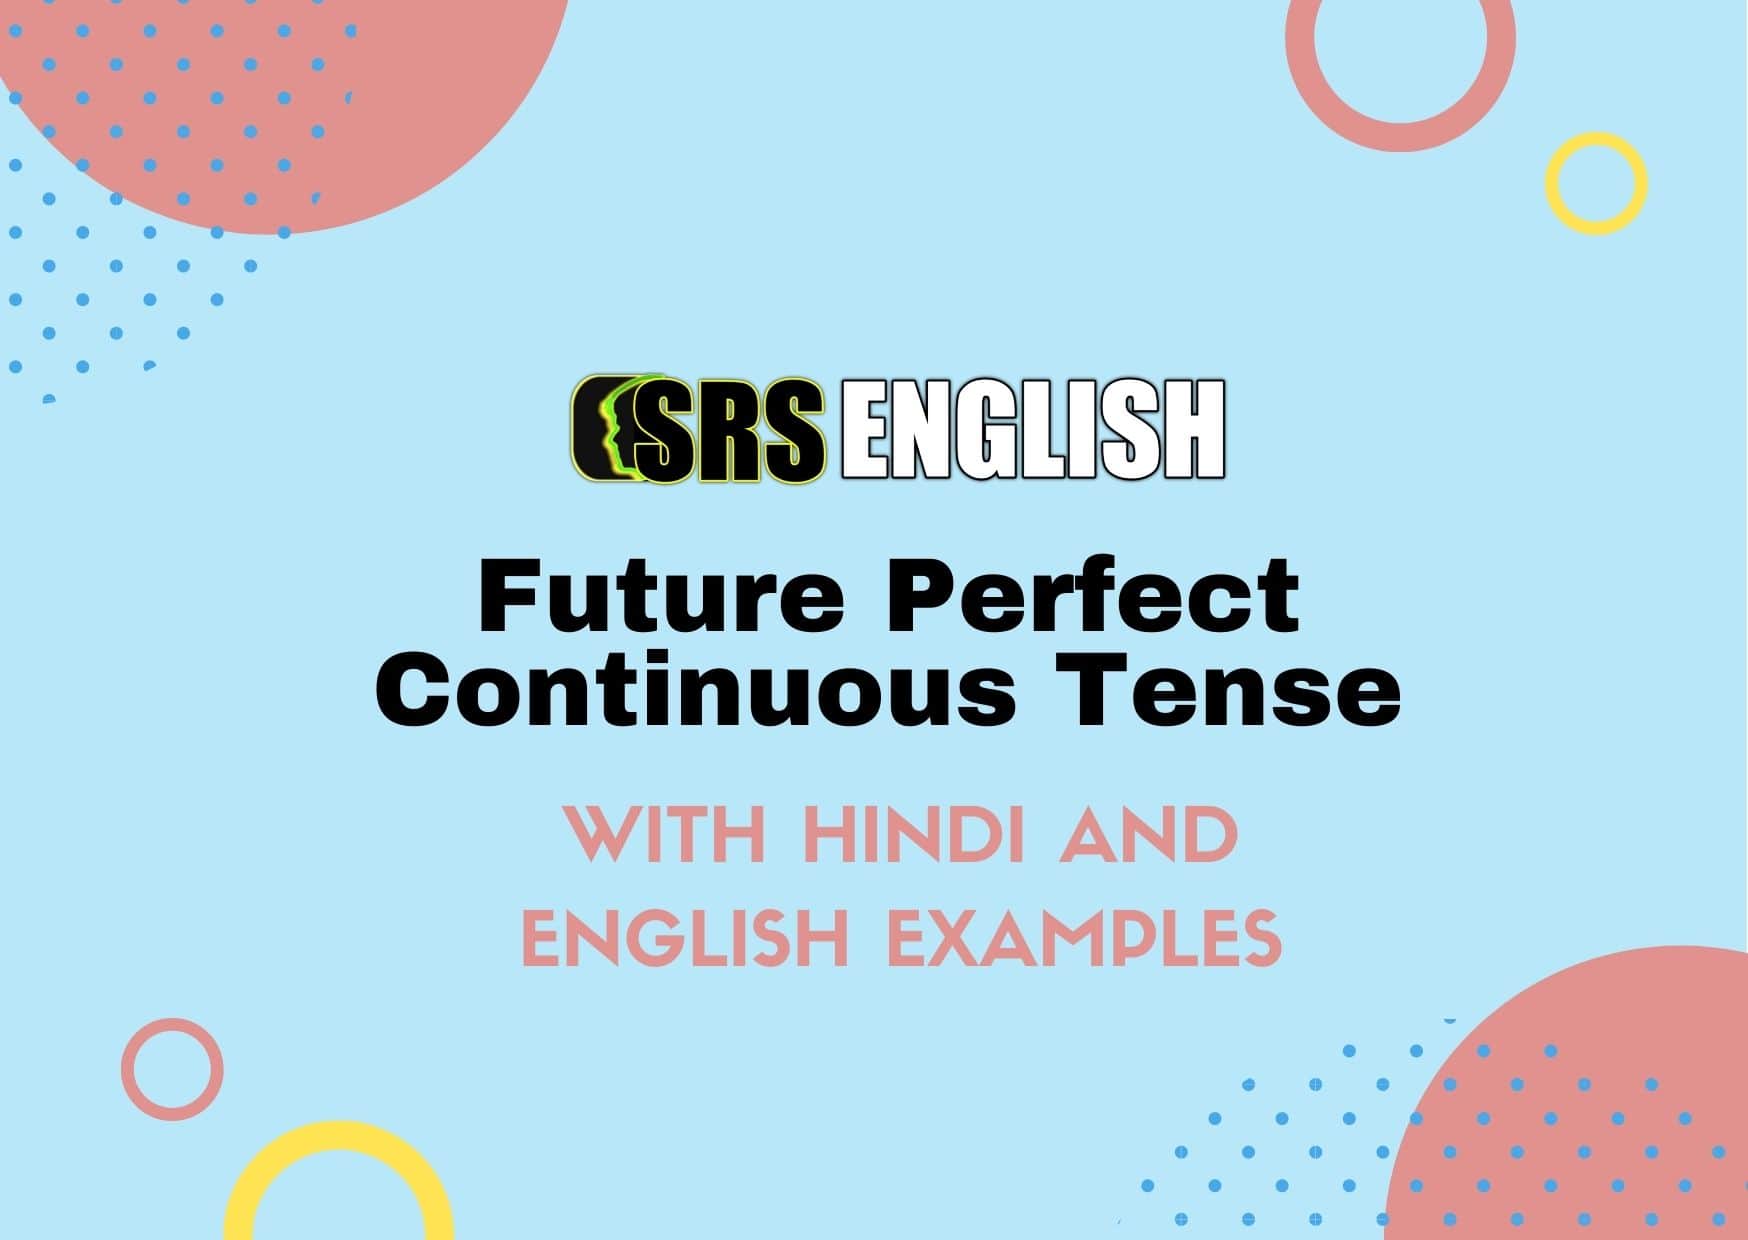 Future Perfect Continuous Tense Examples In Hindi